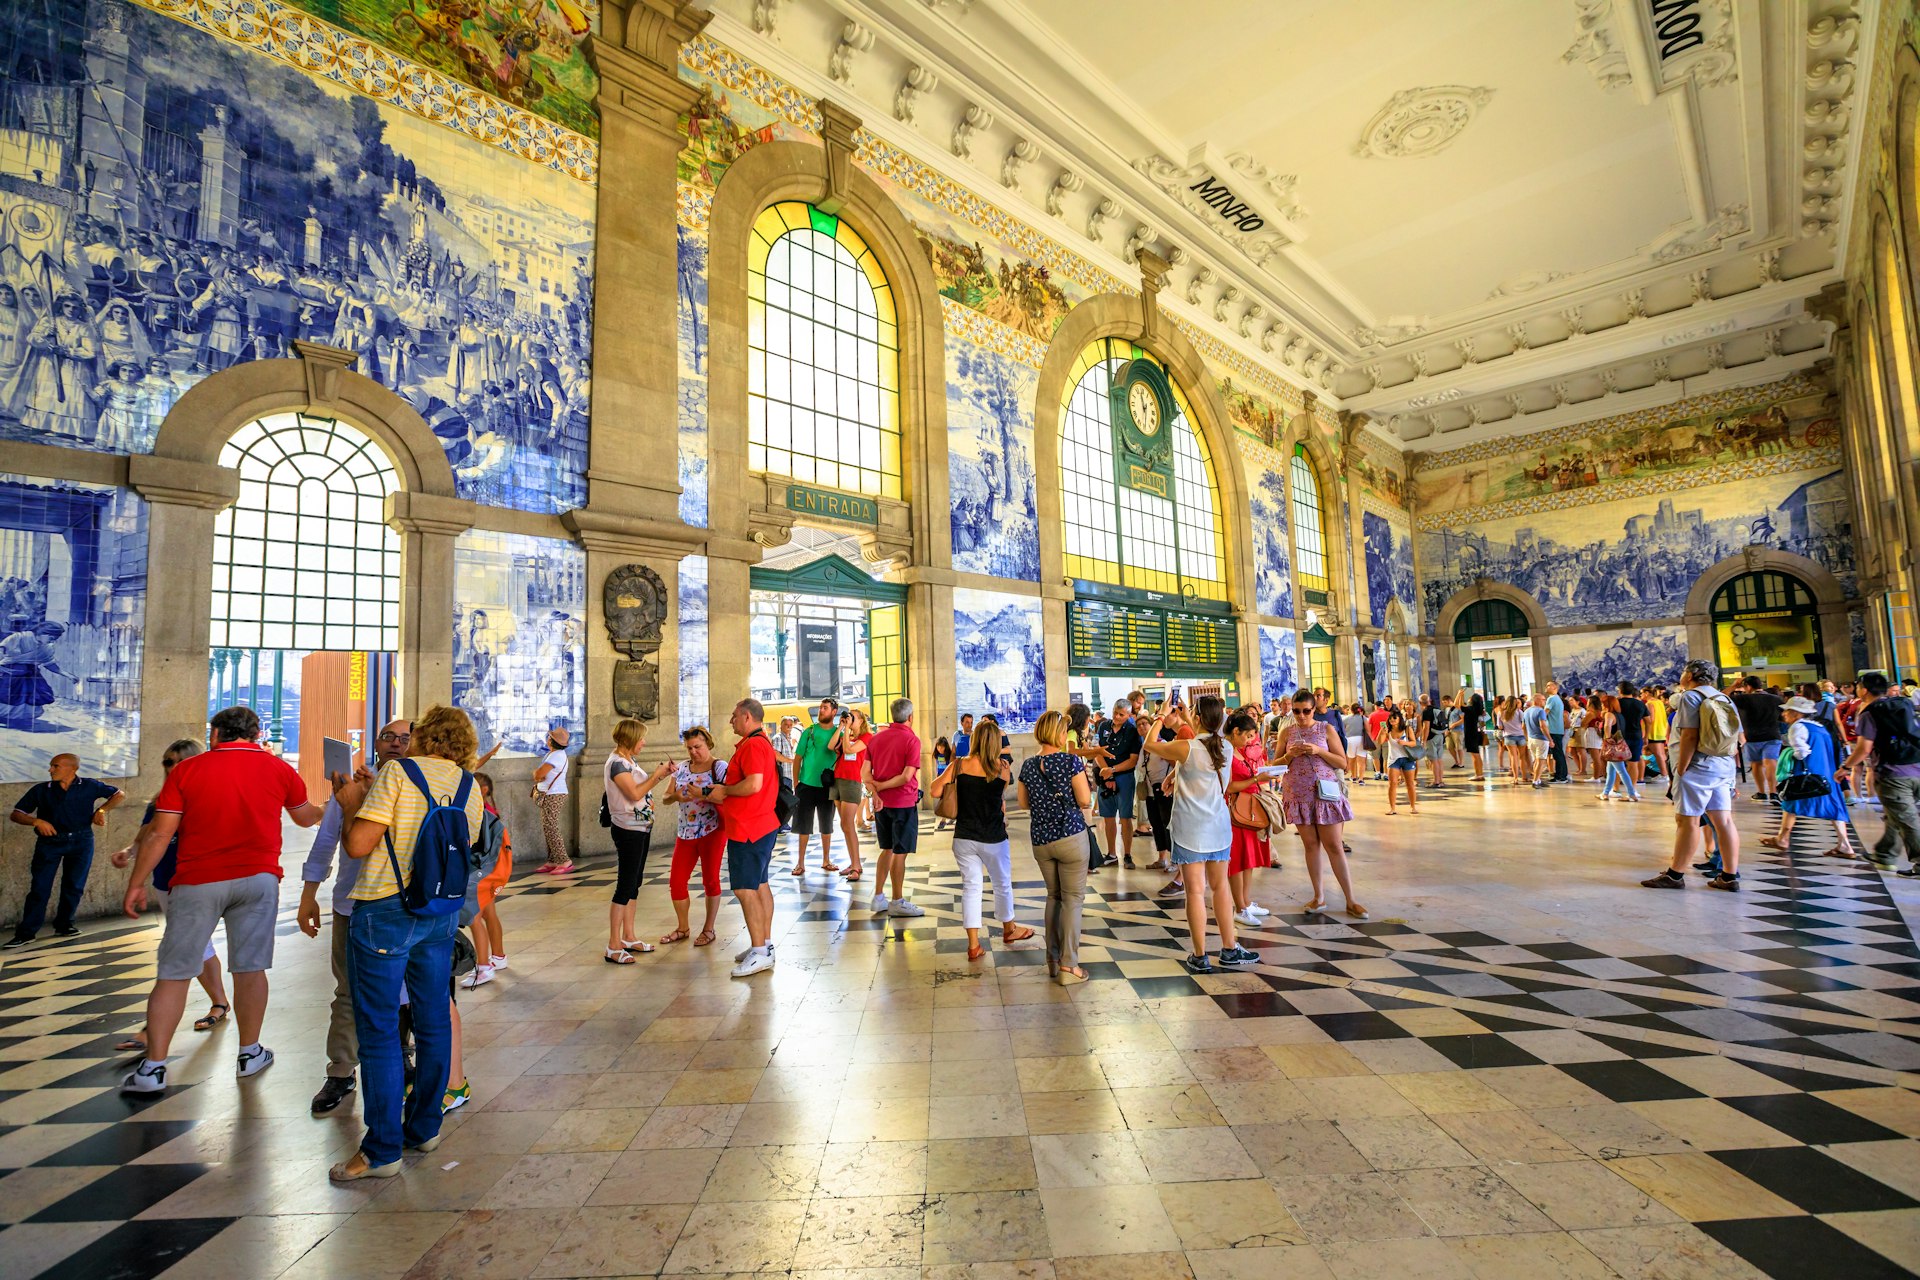 Tourists mill around in a station concourse admiring its intricately tiled walls